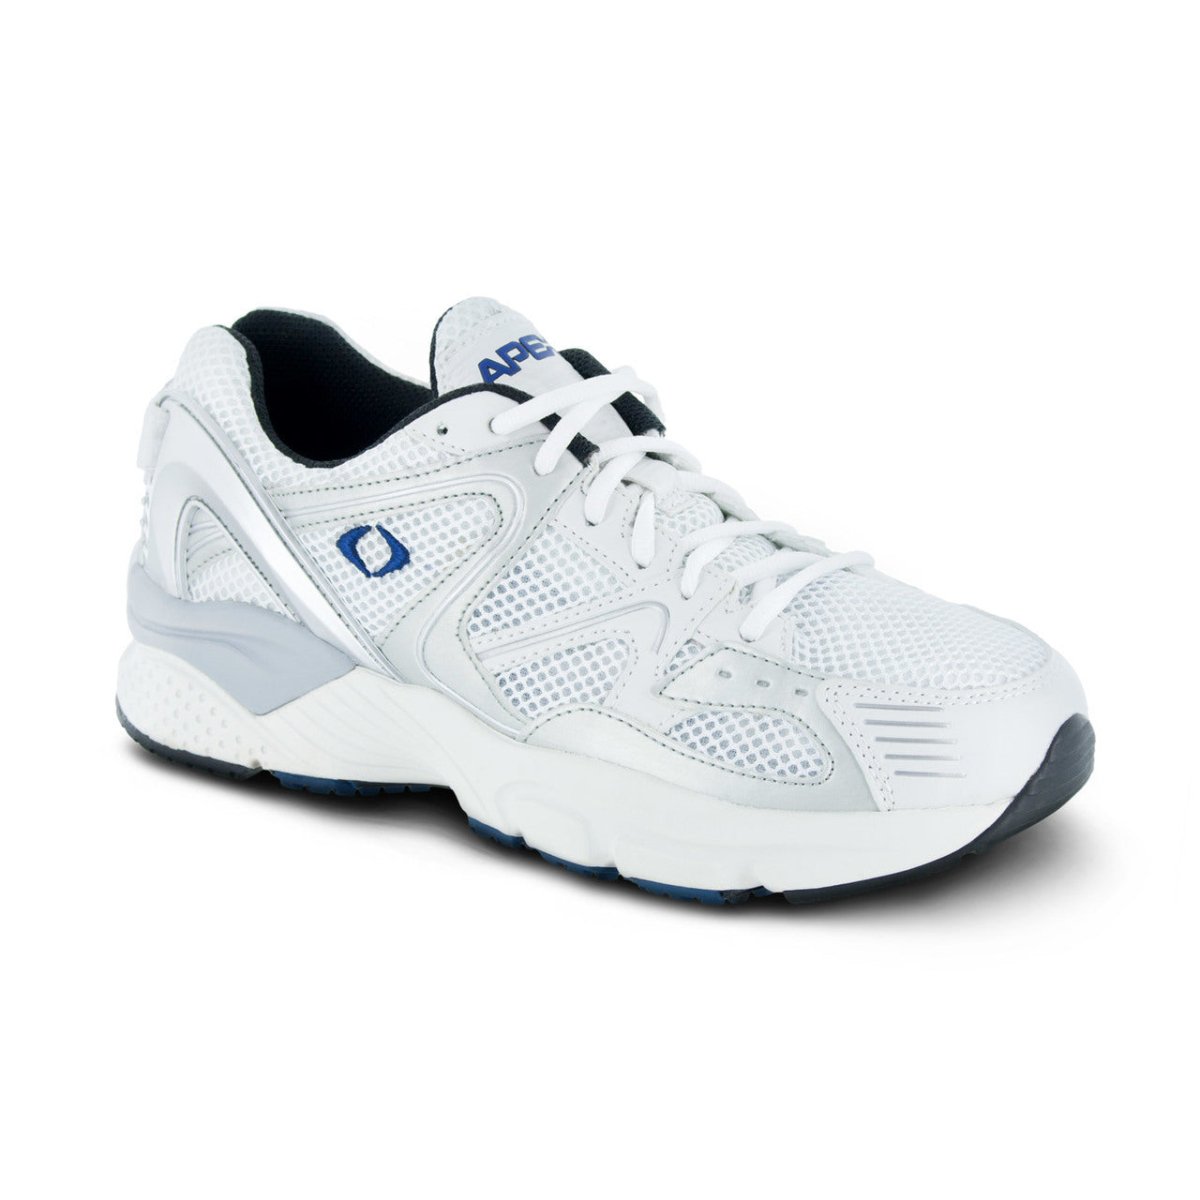 APEX X522M BOSS RUNNER MEN'S ACTIVE SHOE IN WHITE/SILVER/BLUE - TLW Shoes